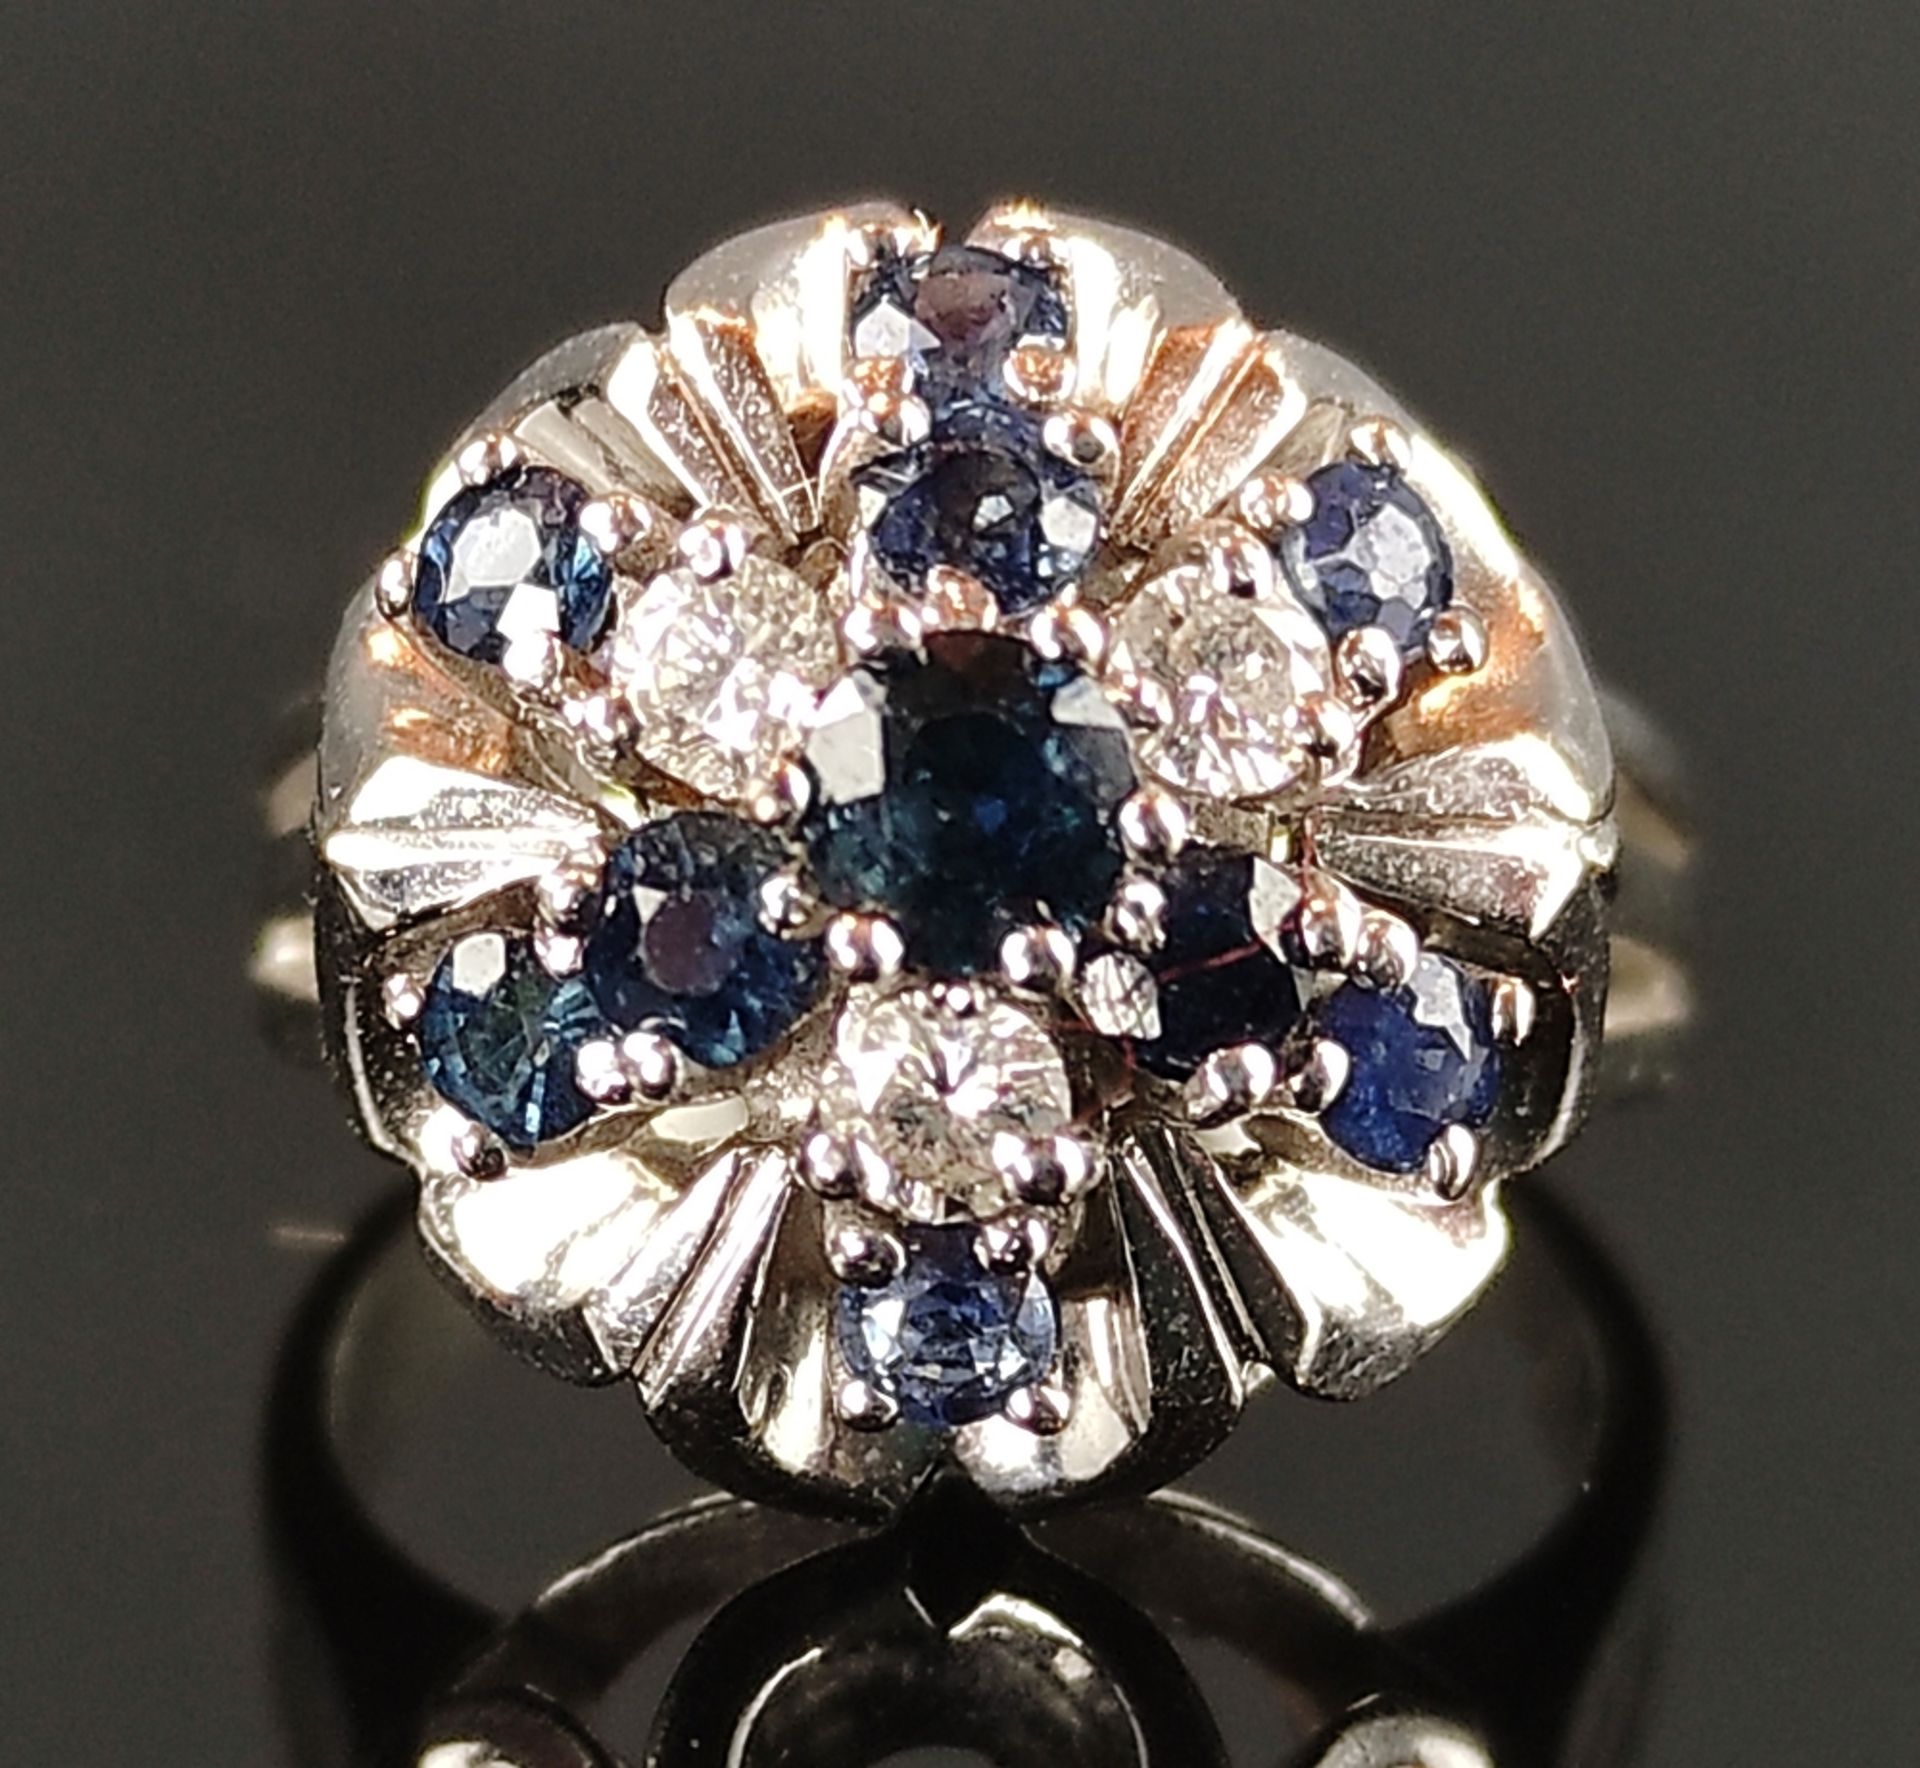 Diamond-sapphire-ring, with 10 sapphires and 3 diamonds, 585/14K white gold, 6.3g, size 48.5 - Image 2 of 6